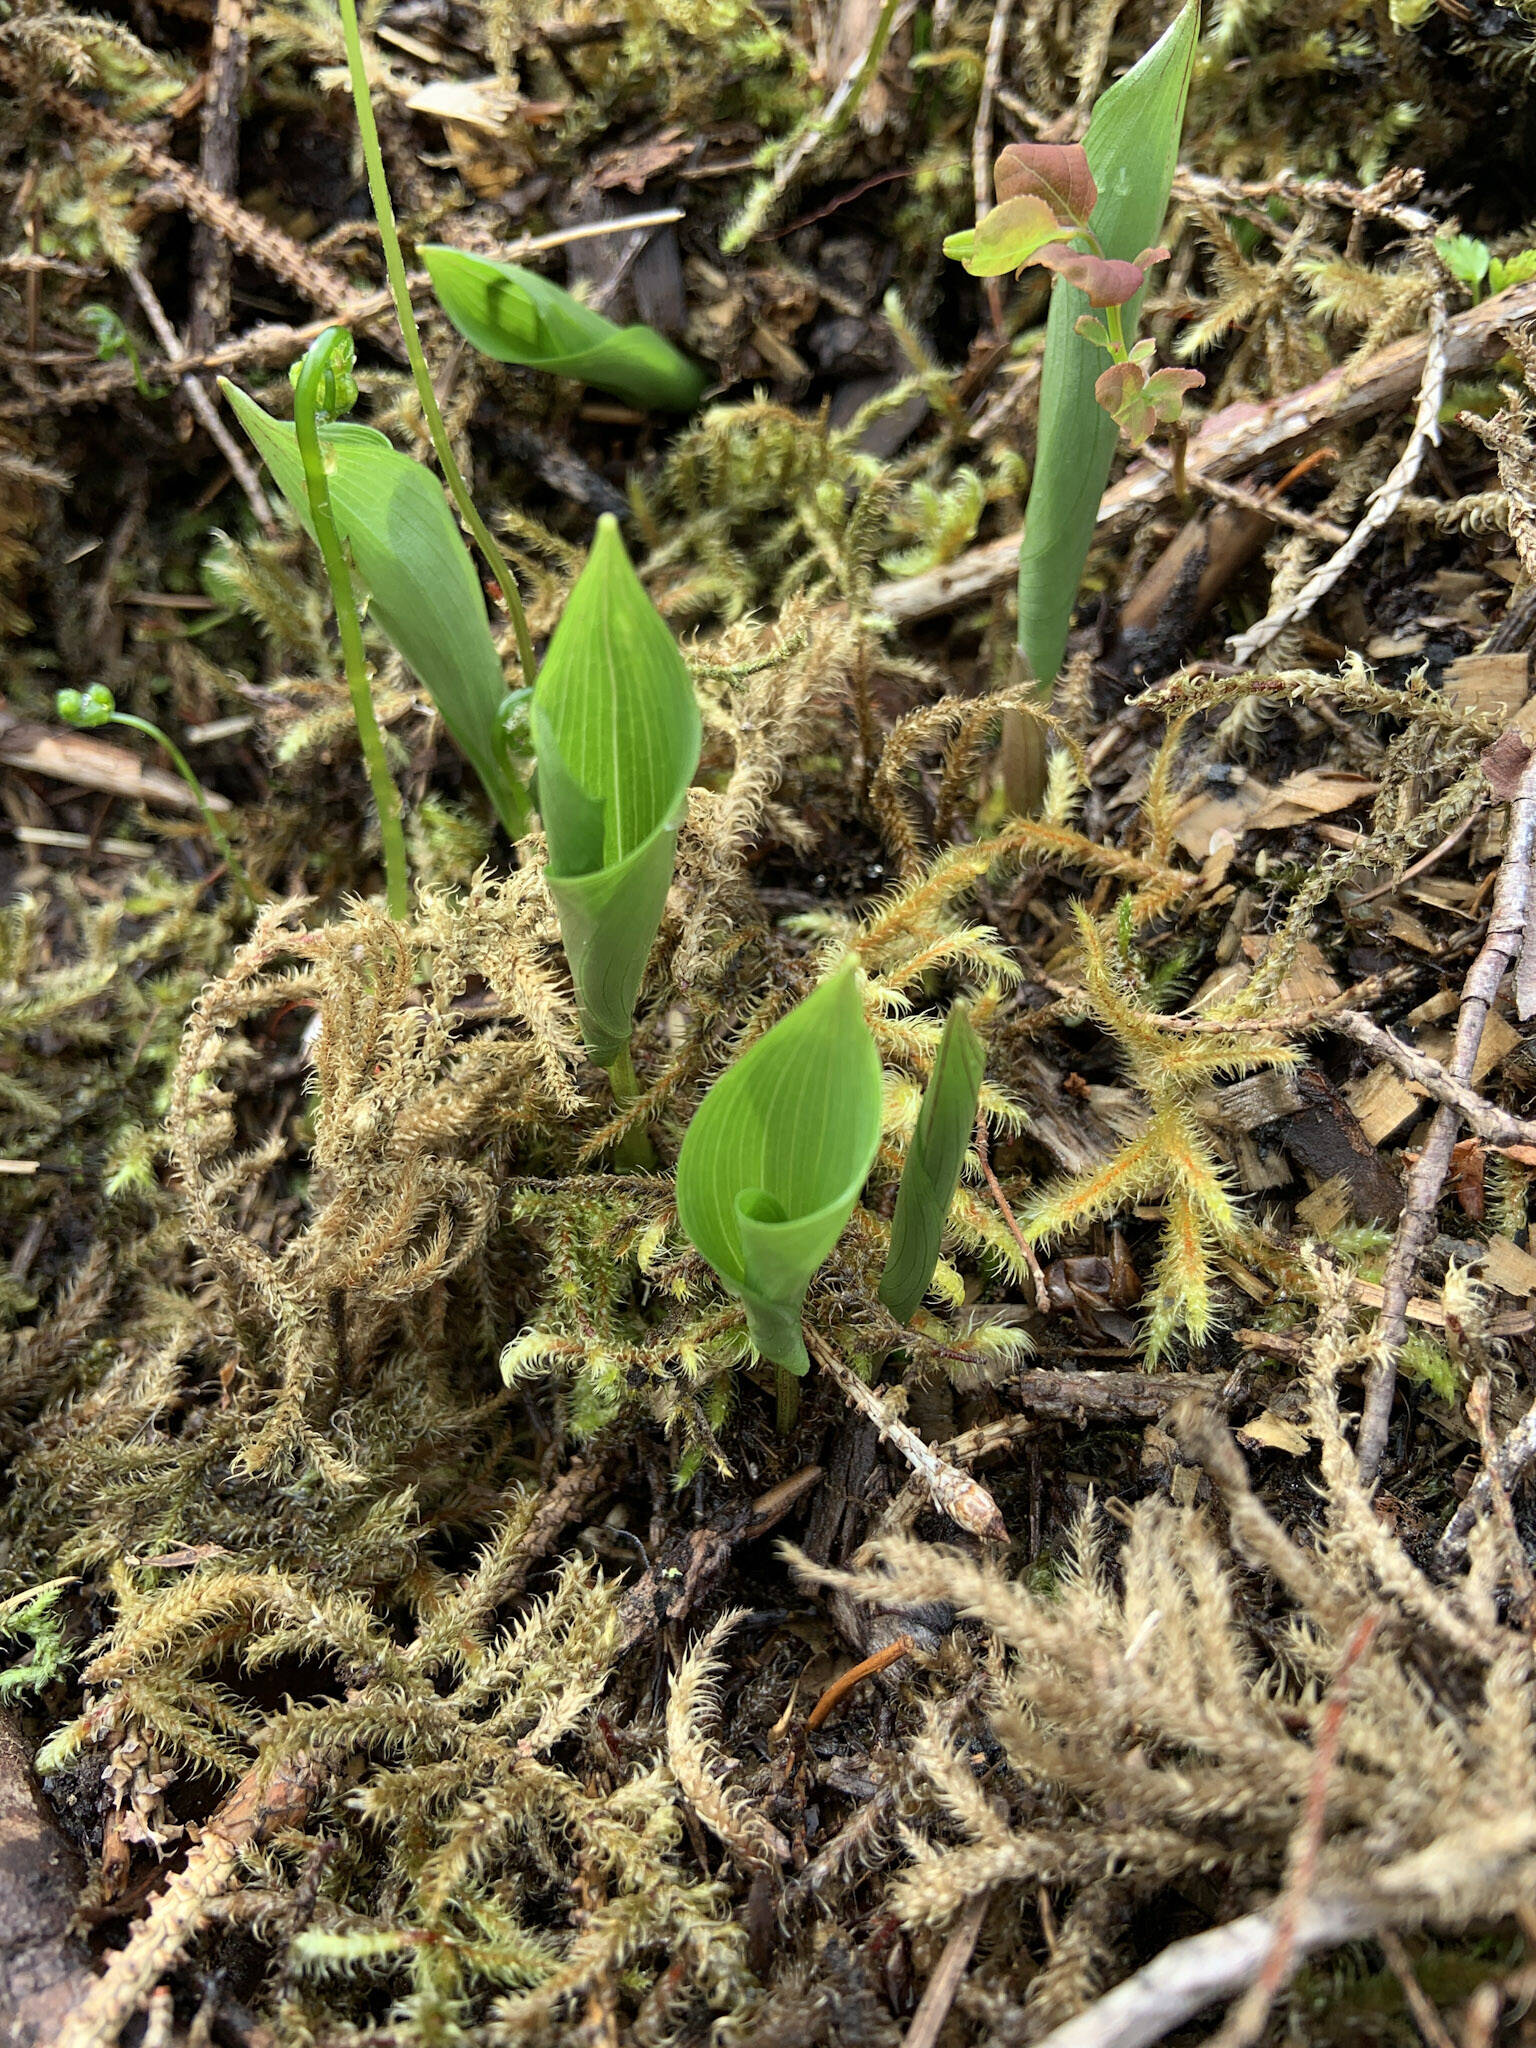 This photo shows deer heart new growth. Deer heart is a single leaf plant about 4 inches in diameter growing on a single stem. The plant emerges from the soil rolled up and as it grows, the leaf unrolls to a heart shape. (Courtesy Photo / Mary Goddard)